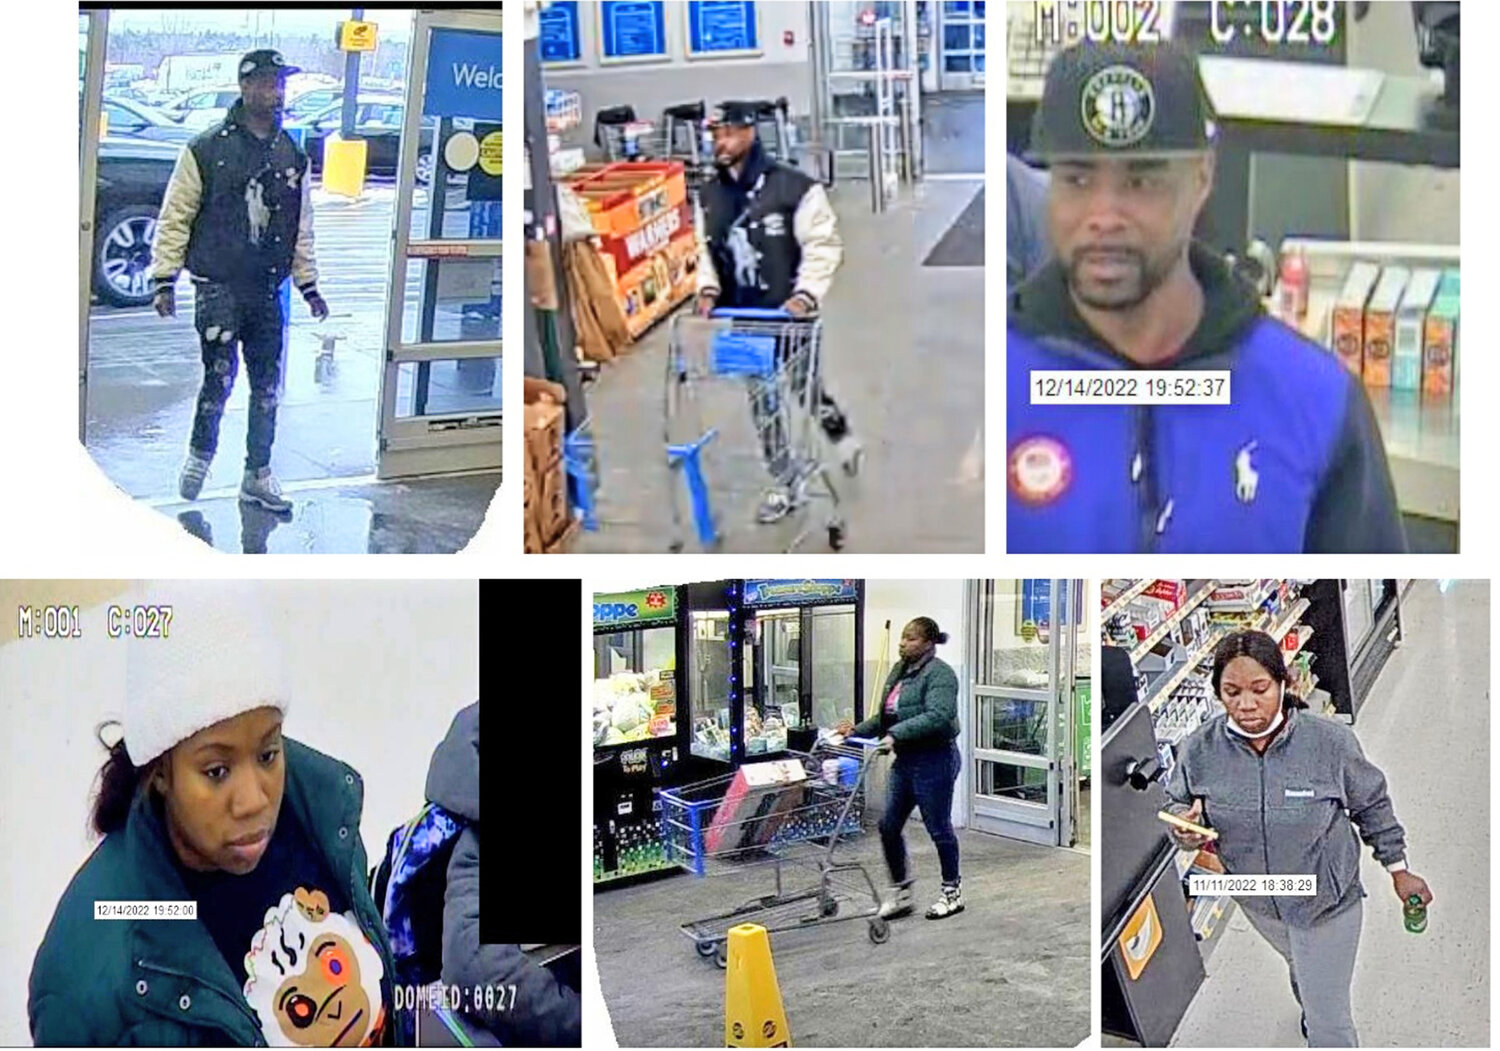 This man and woman are being sought by the New York State Police for allegedly passing counterfeit $100 bills at Walmart locations in Lewis and Jefferson counties in November and December. Anyone who recognizes them is asked to call the state police at 315-366-6000.